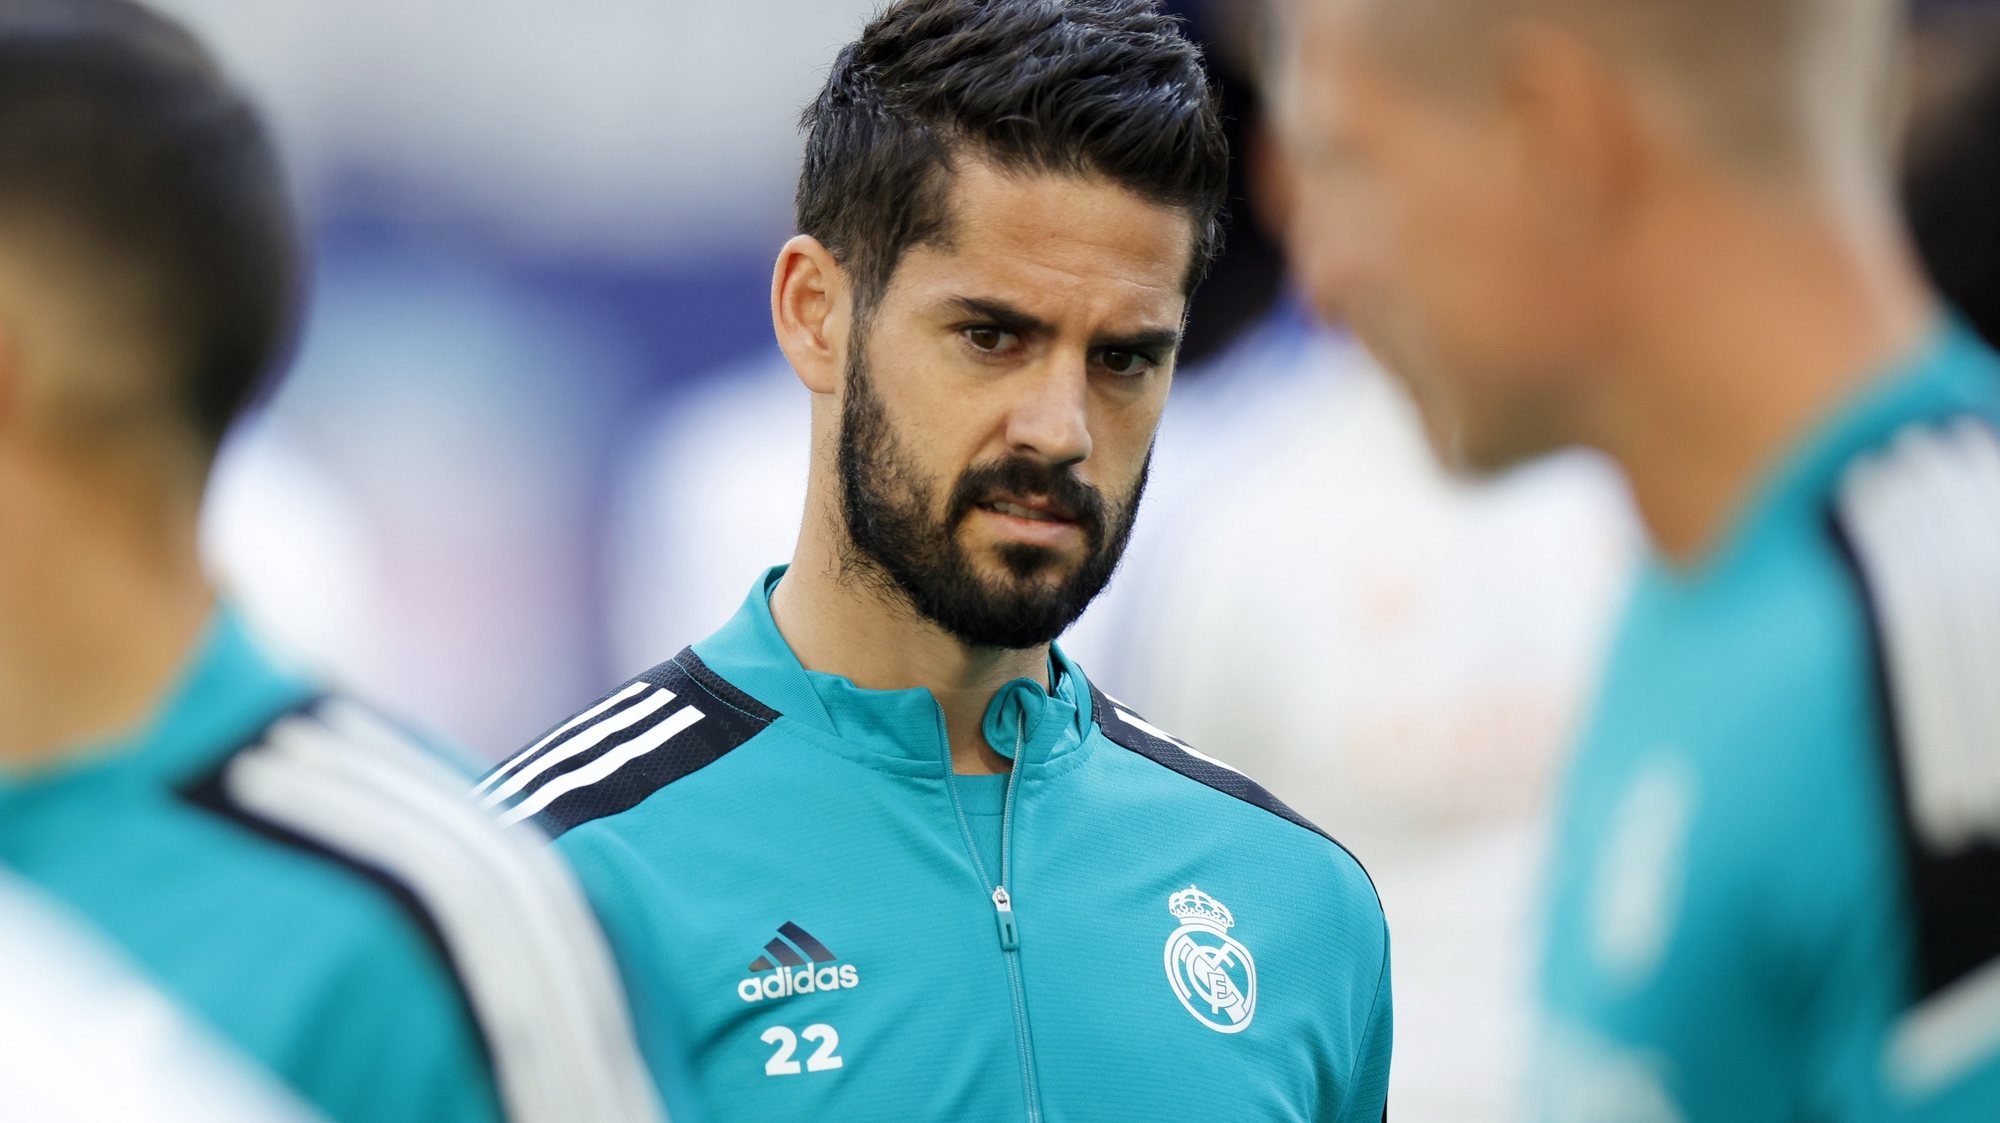 epa09980773 Isco of Real Madrid attends the team&#039;s training session at Stade de France in Saint-Denis, near Paris, France, 27 May 2022. Real Madrid will face Liverpool FC in their UEFA Champions League final on 28 May 2022.  EPA/YOAN VALAT